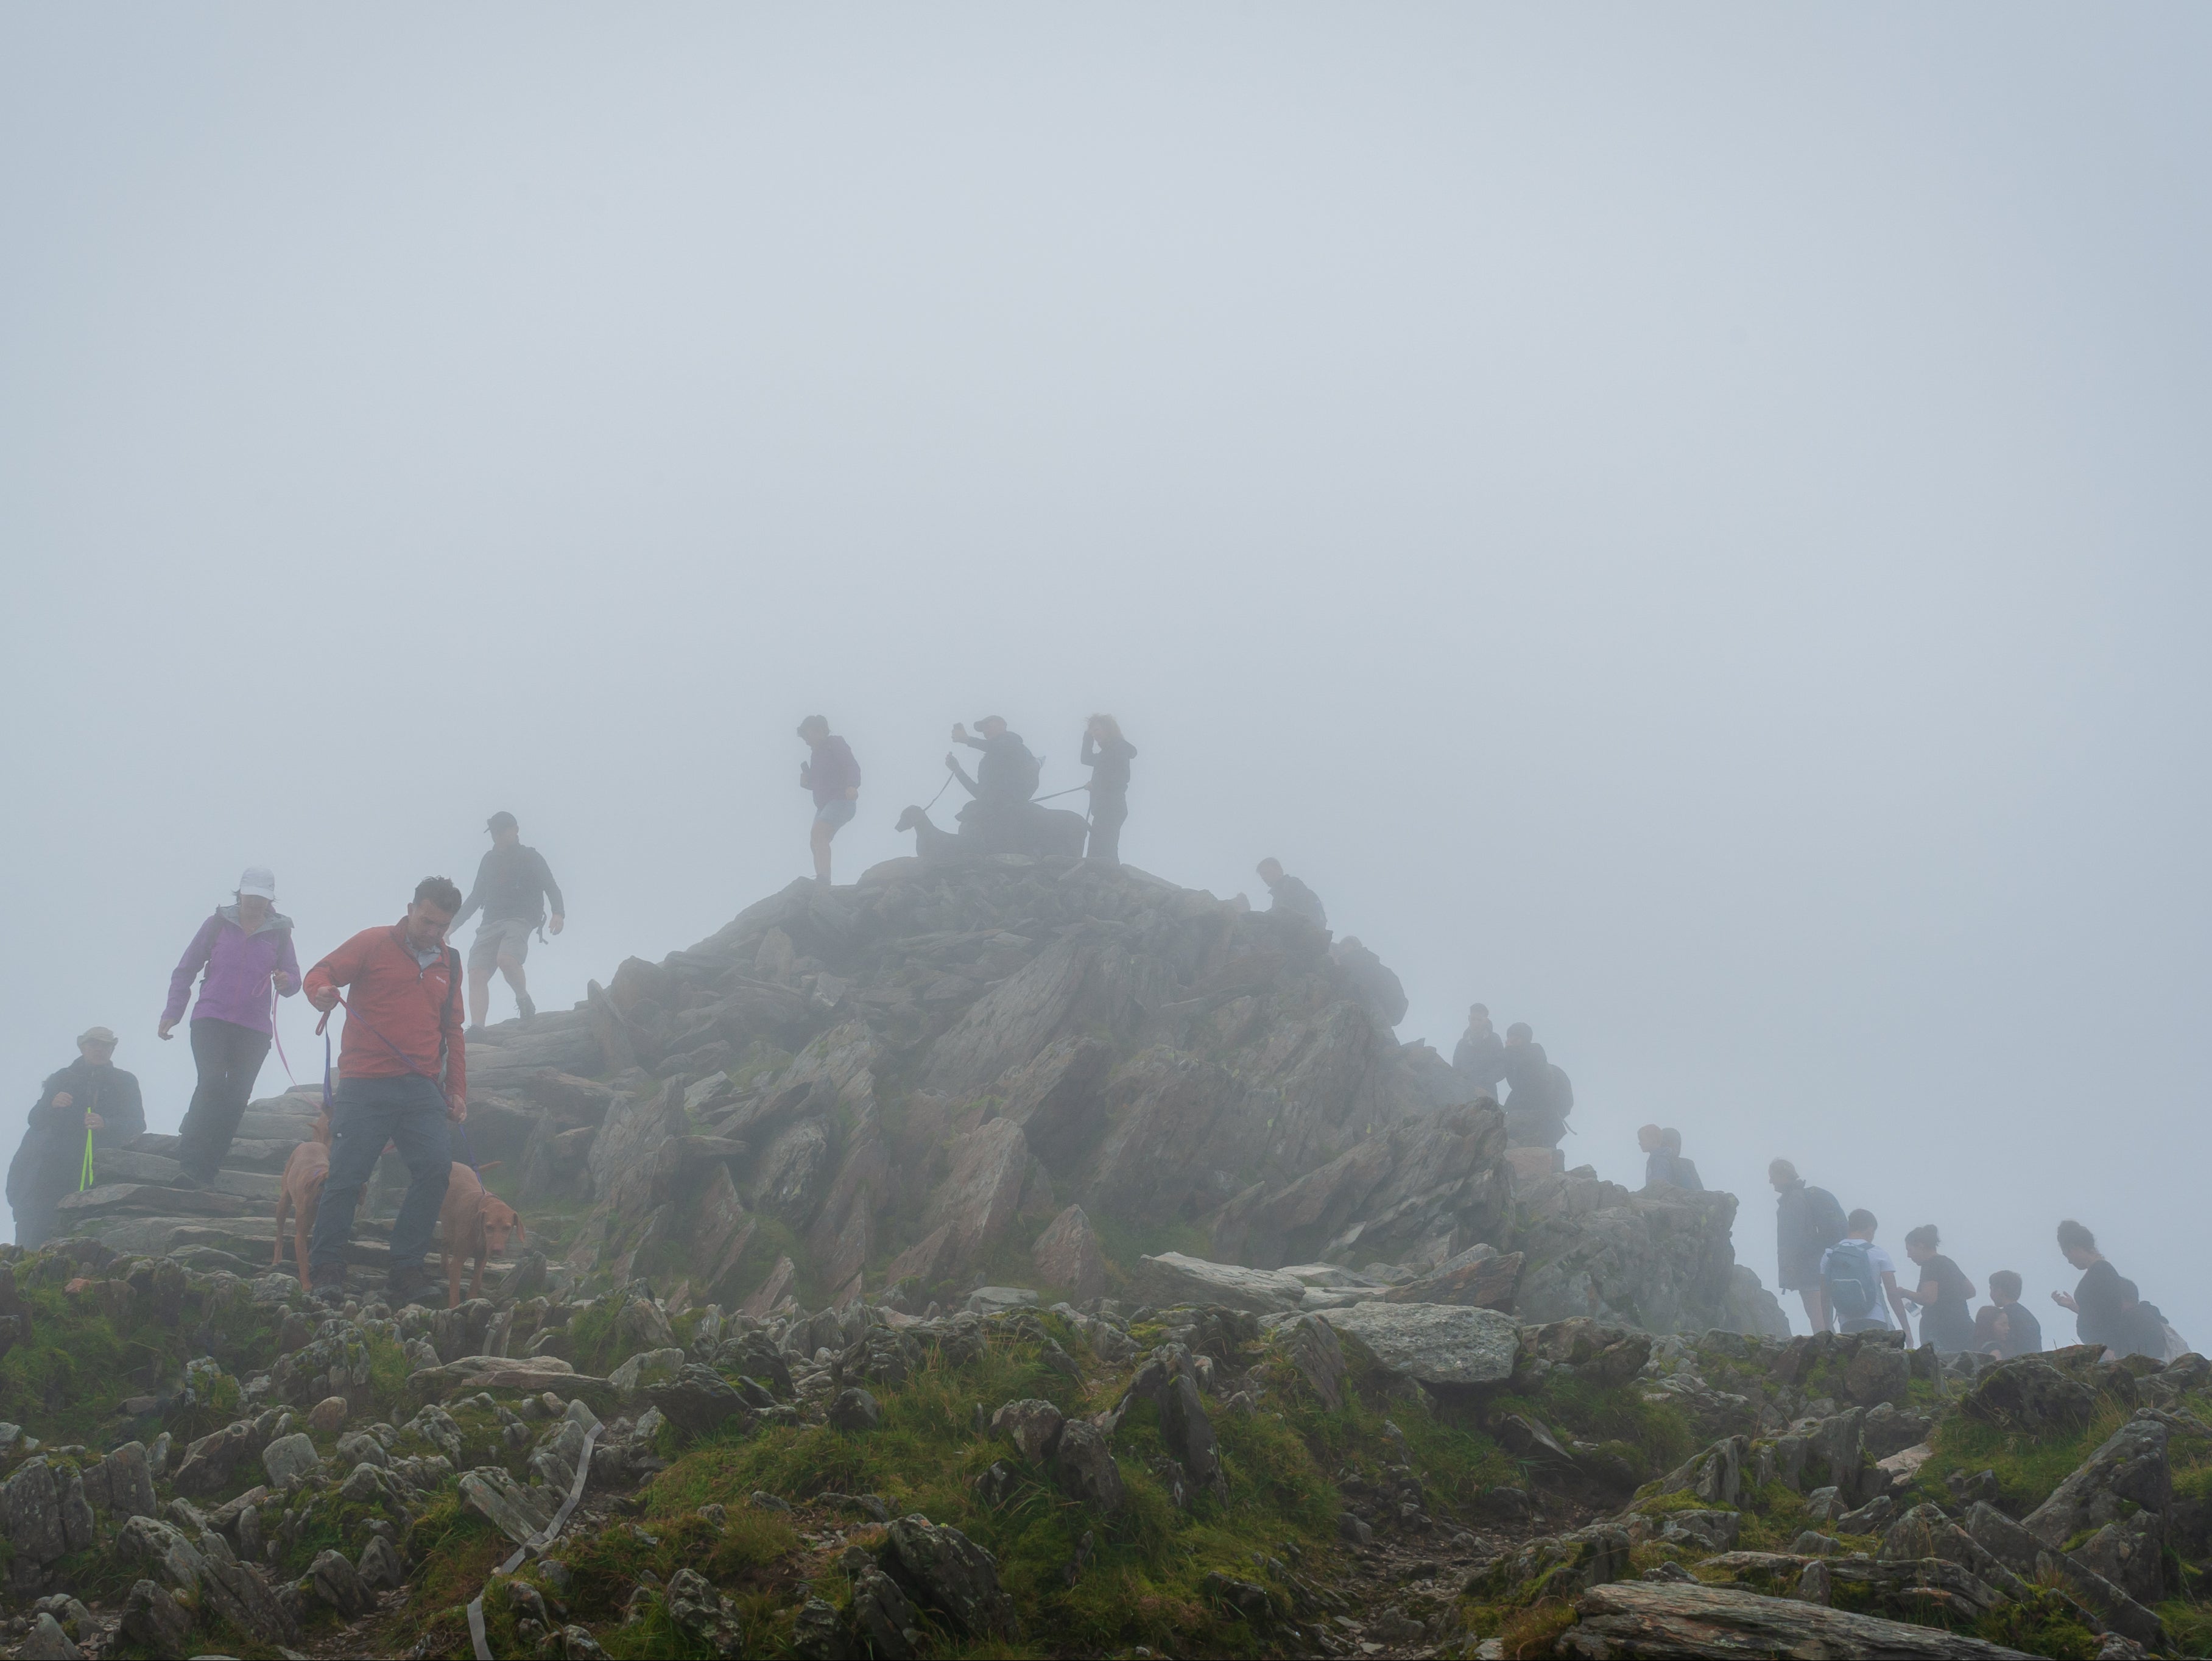 The peak of Snowdon is often busy with walkers